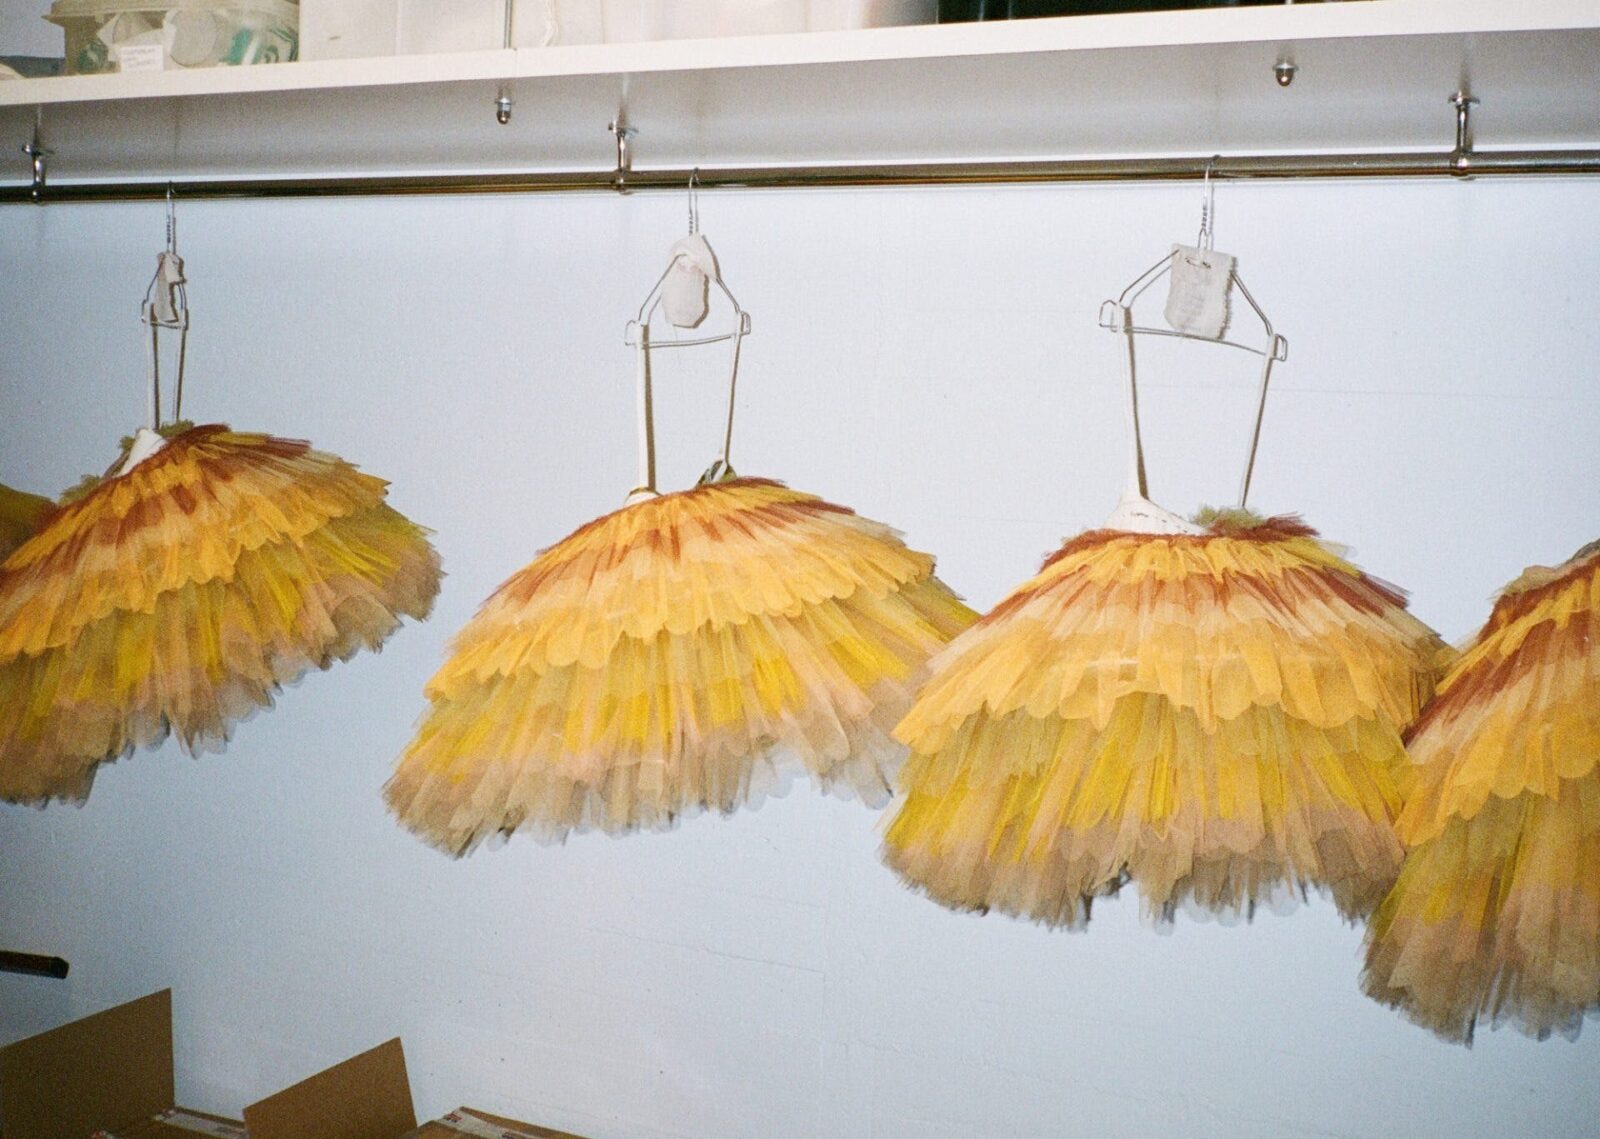 Four yellow tutus hanging in a line